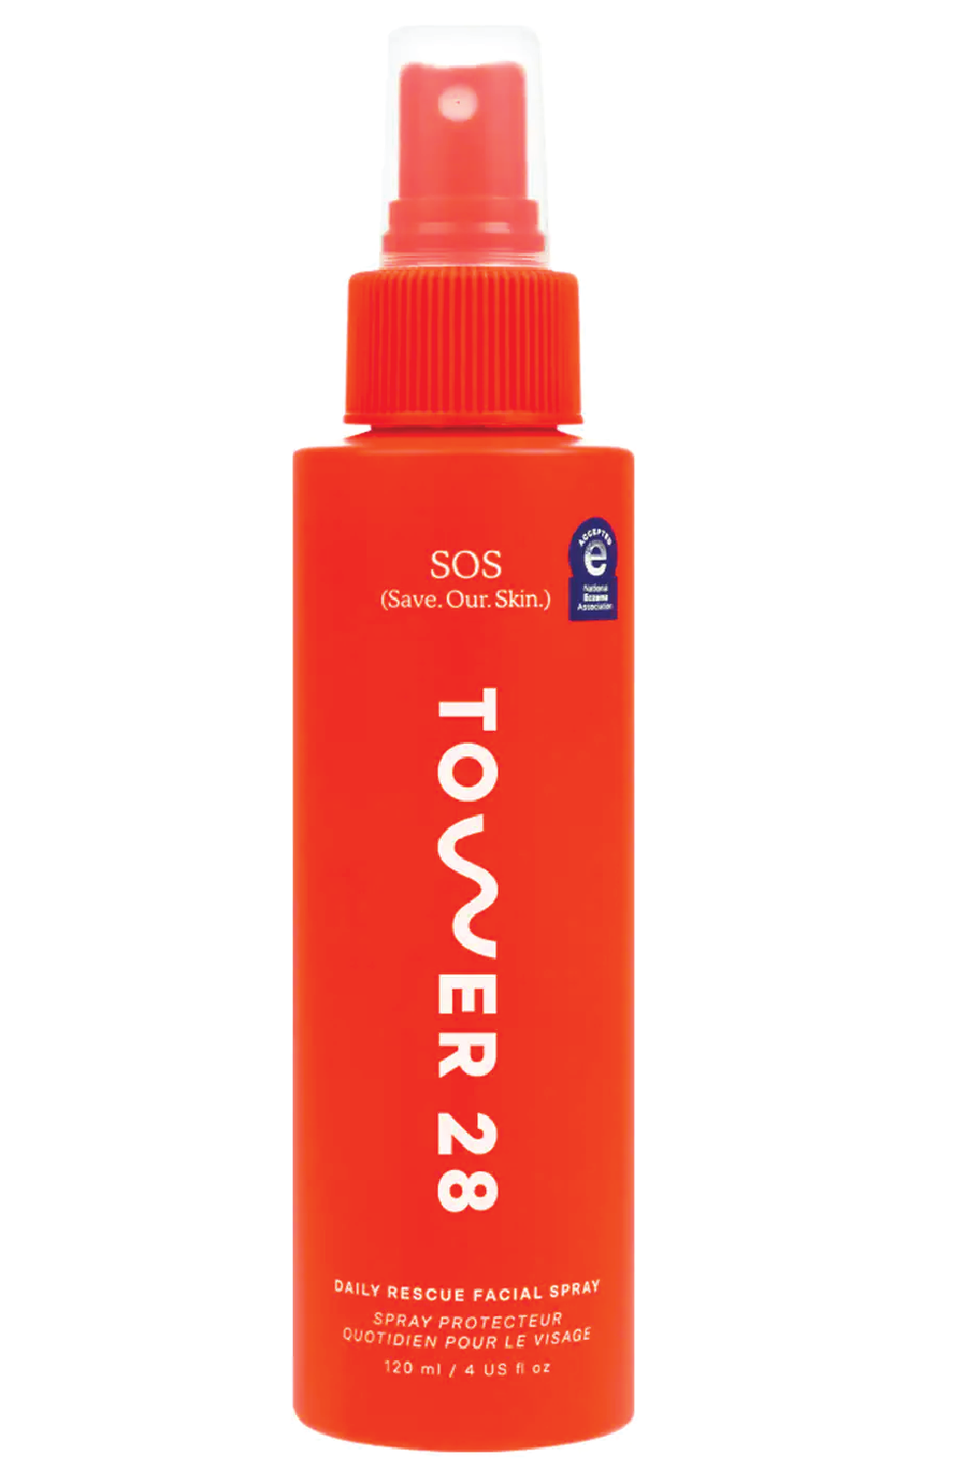 Tower 28 Beauty SOS (Save.Our.Skin) Daily Rescue Facial Spray